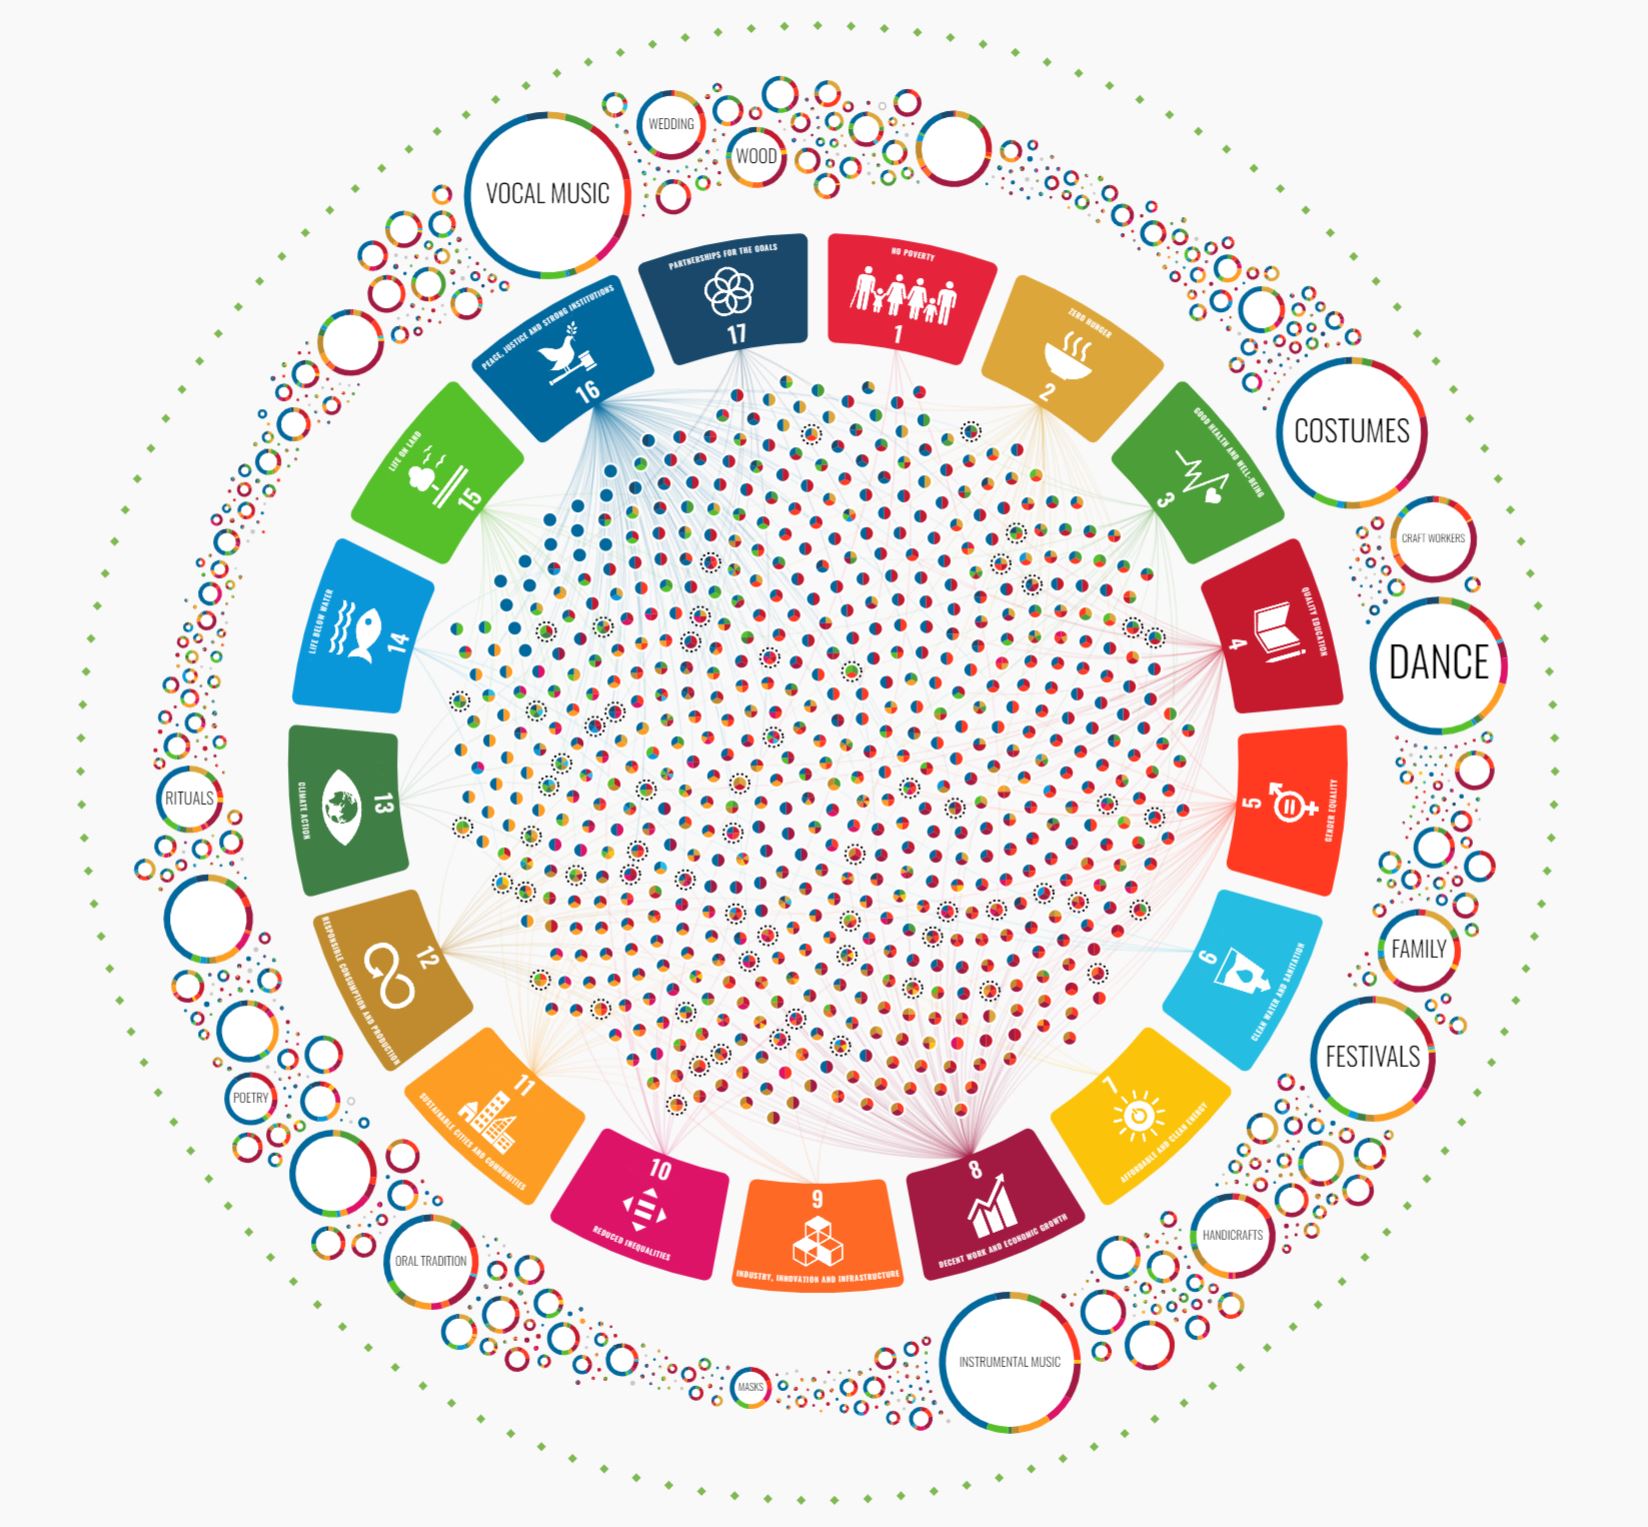 A interactive map of nearly 500 elements of intangible cultural heritage curated by UNESCO with web semantics and overlaid into their networked relationships to the 17 United Nations (UN) Sustainable Development Goals (SDGs). (Image source: UNESCO Dive Into Intangible Cultural Heritage)